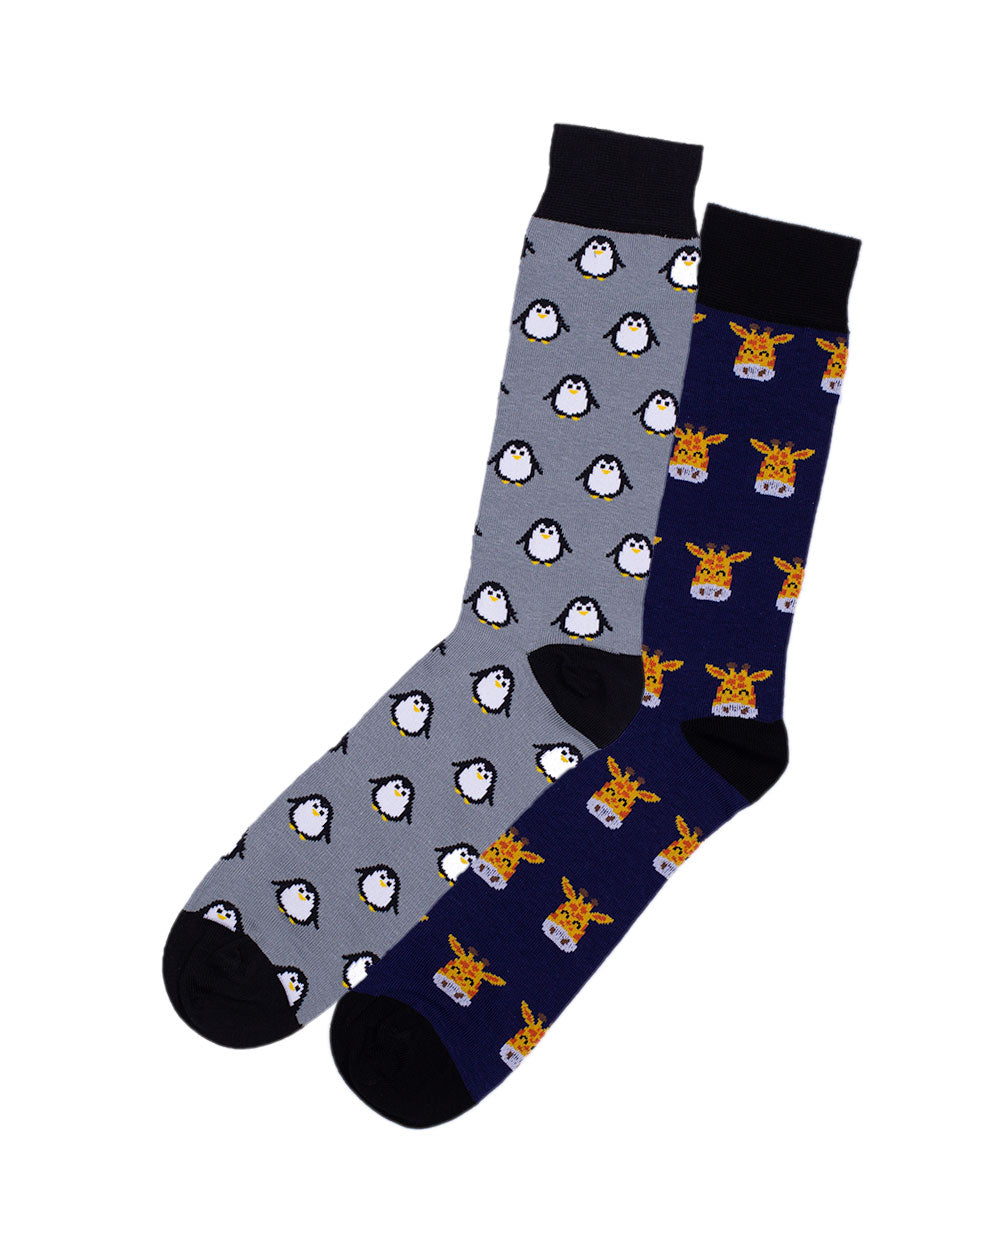 2t Patterned Socks 2 Pairs (animals)